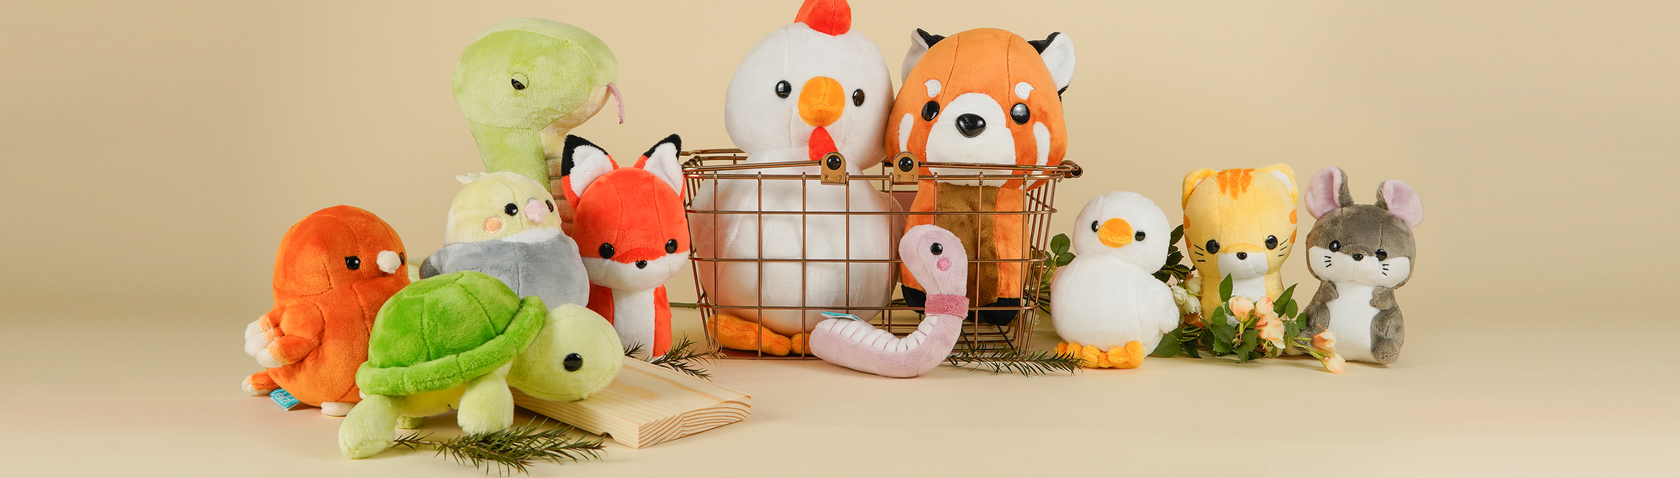 Best Selling Plushy Collection